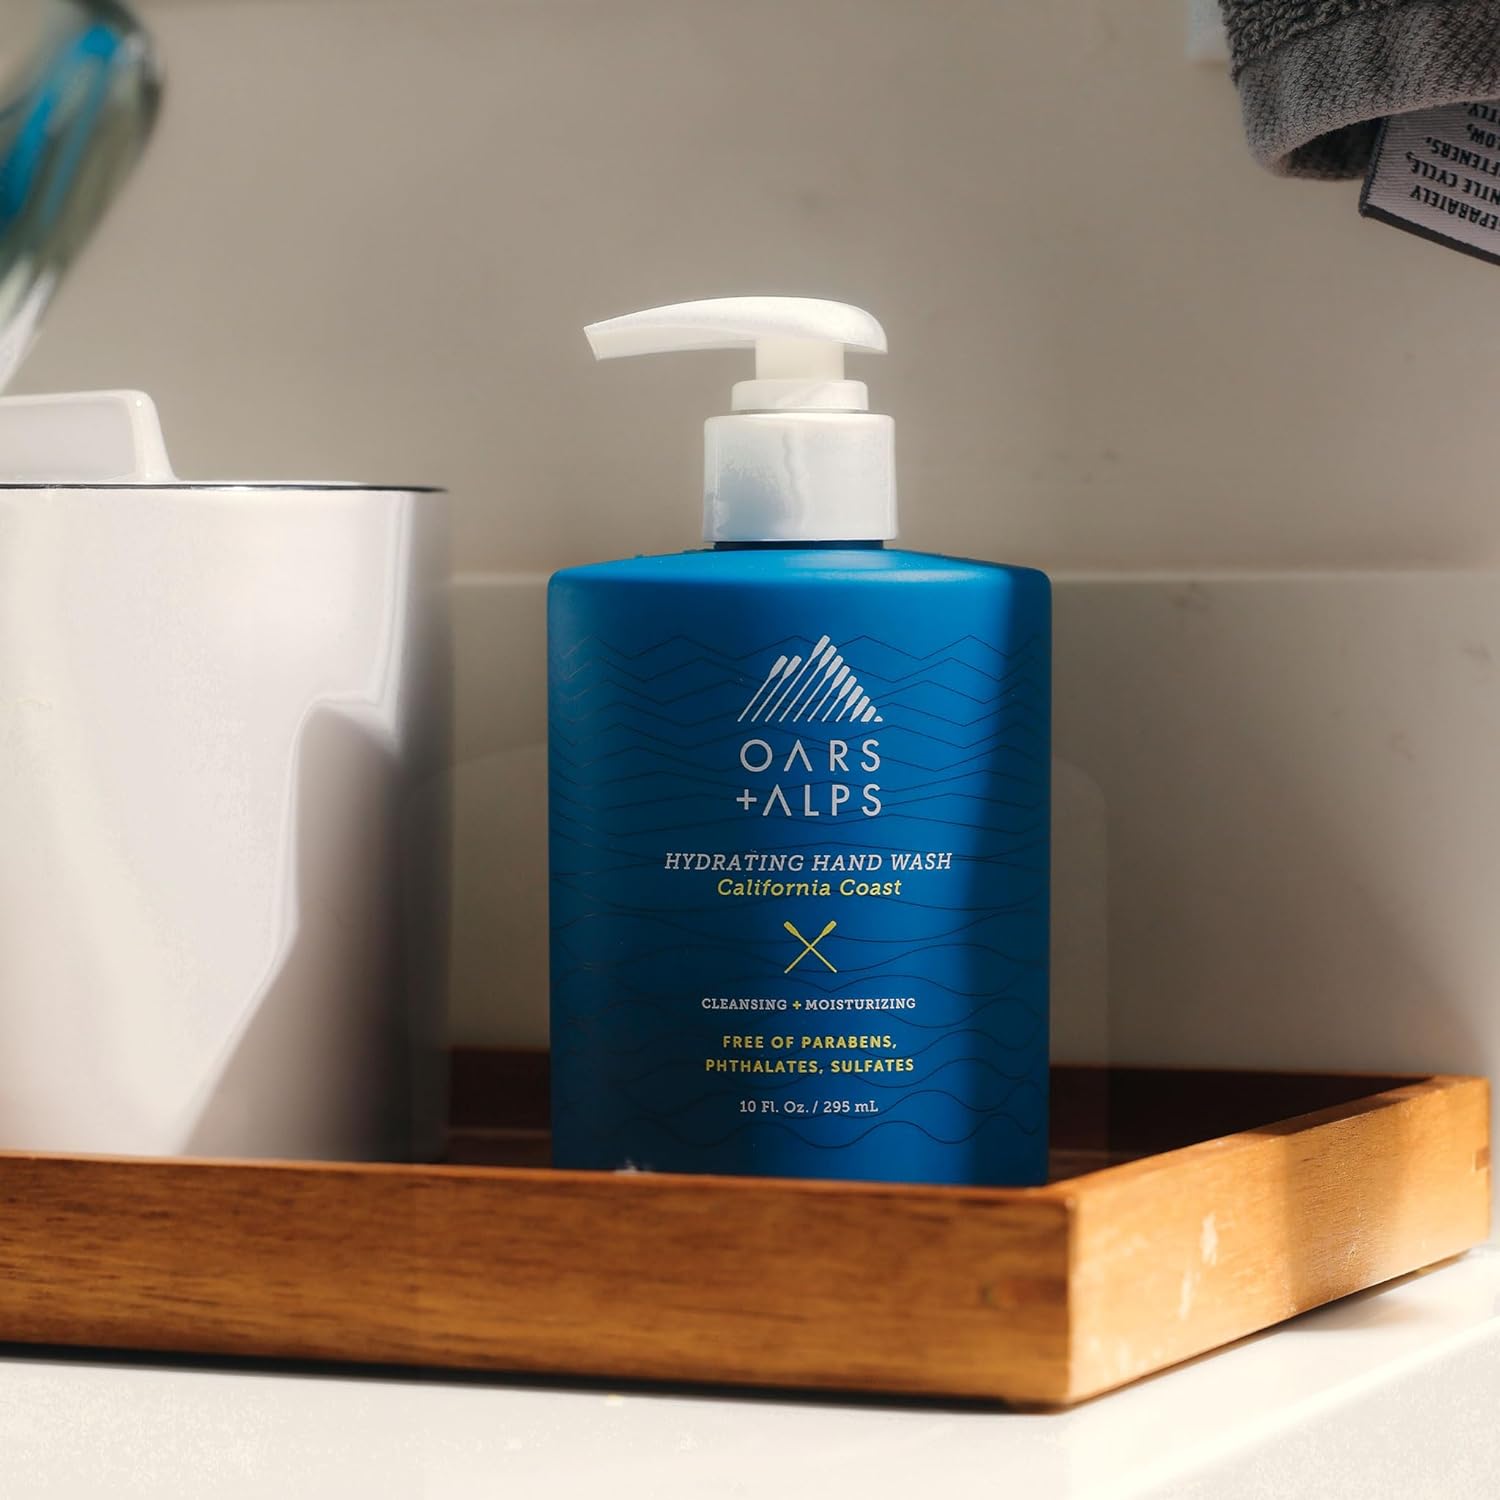 Oars + Alps Hydrating Liquid Hand Soap, Made with Coconut Oil & Aloe Vera to Moisturize Dry Hands, Gentle Hand Wash with Vitamin E, California Coast Scent, 10 Fl. Oz Bottle : Beauty & Personal Care